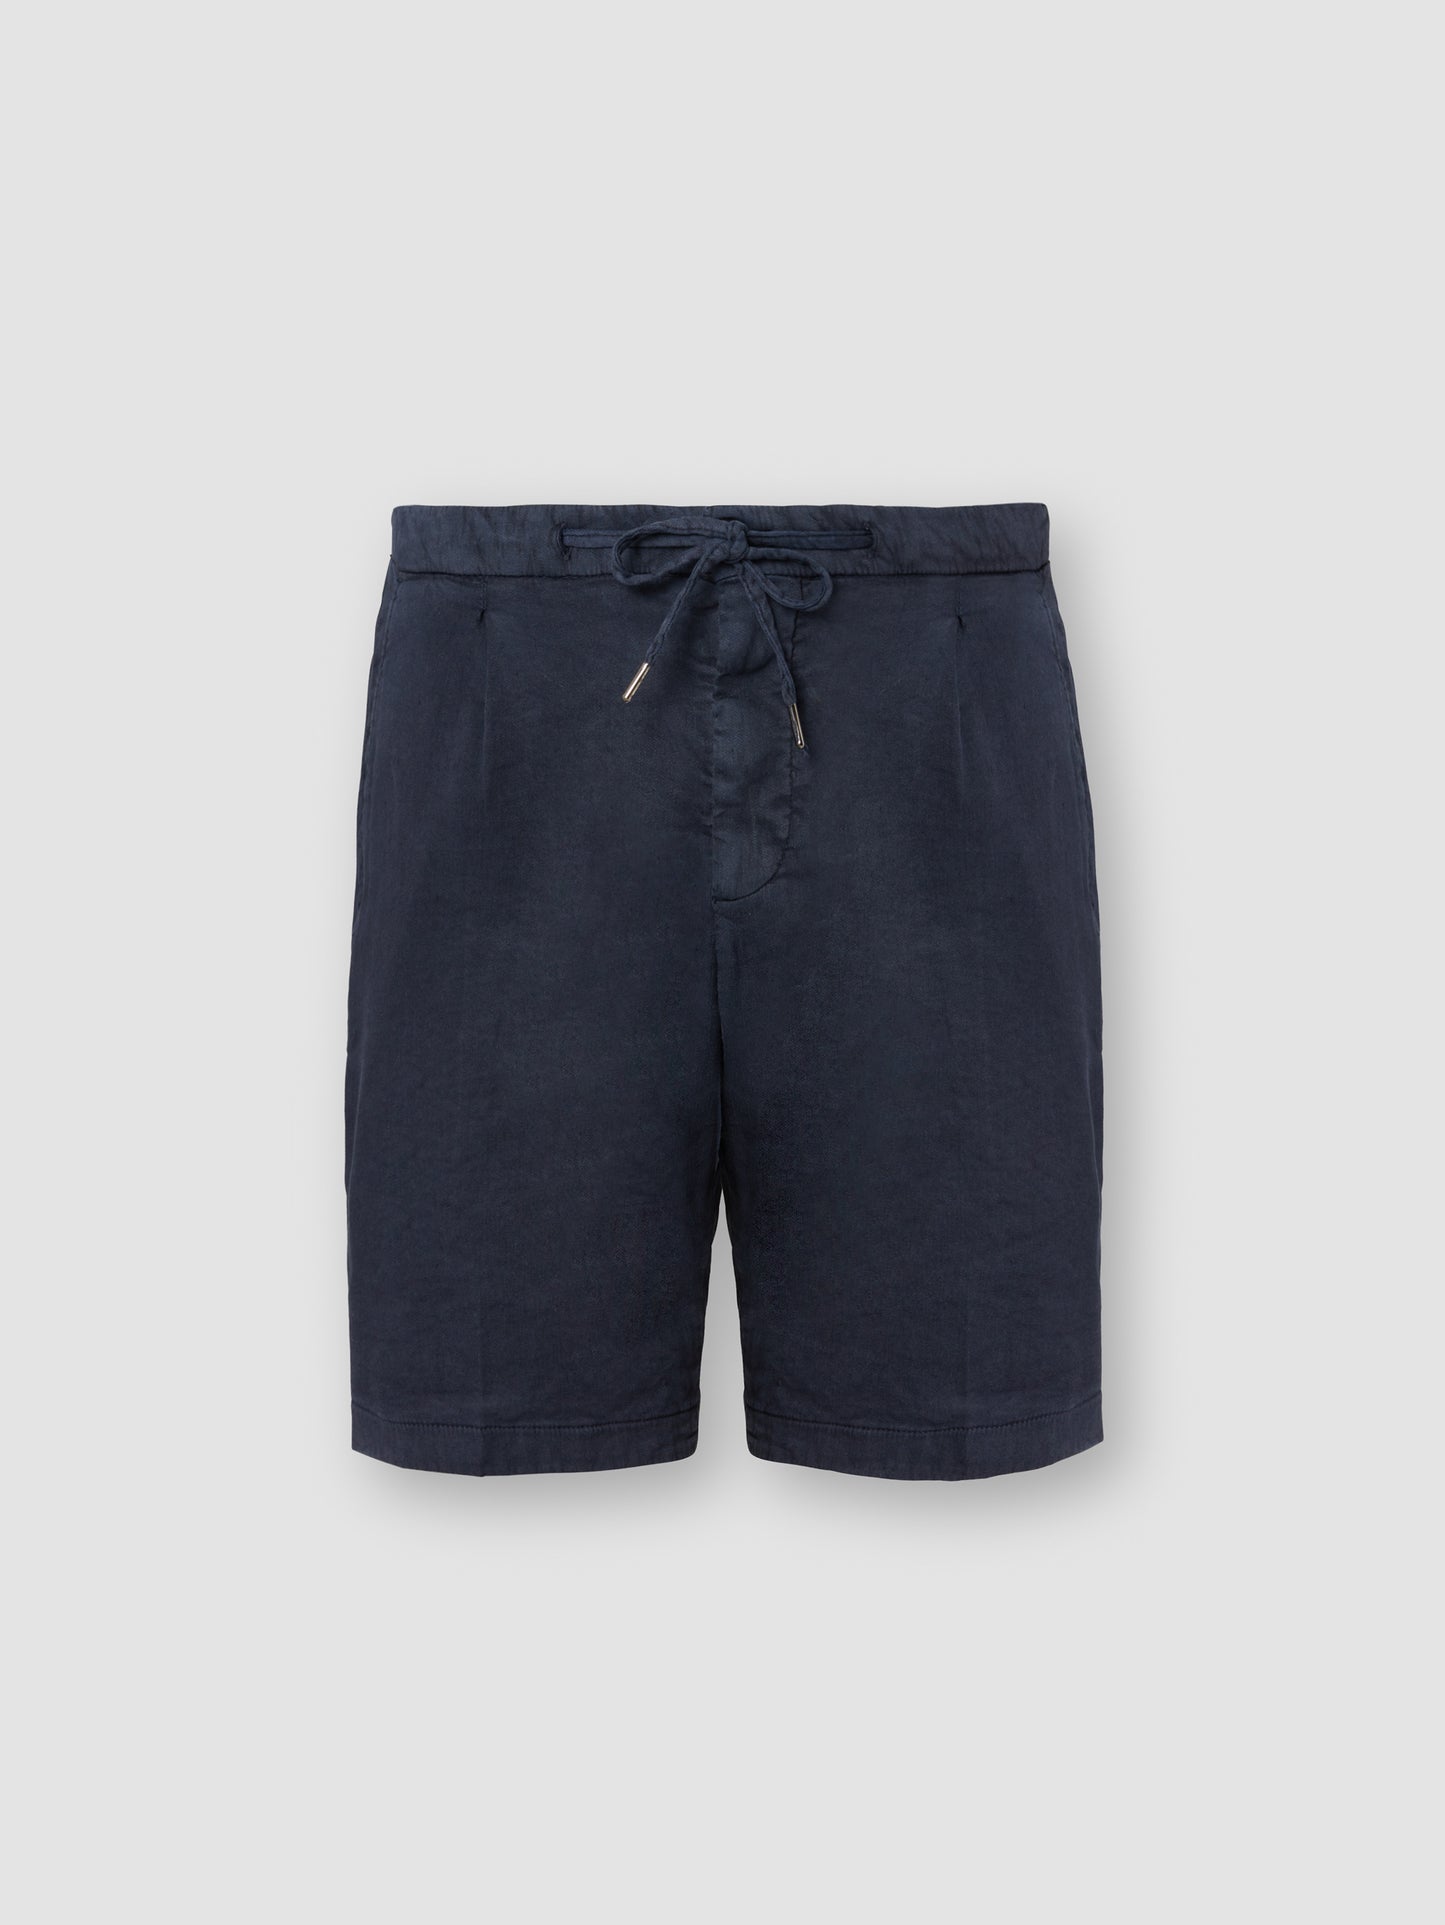 Linen Jersey Pleated Shorts Navy Product Image